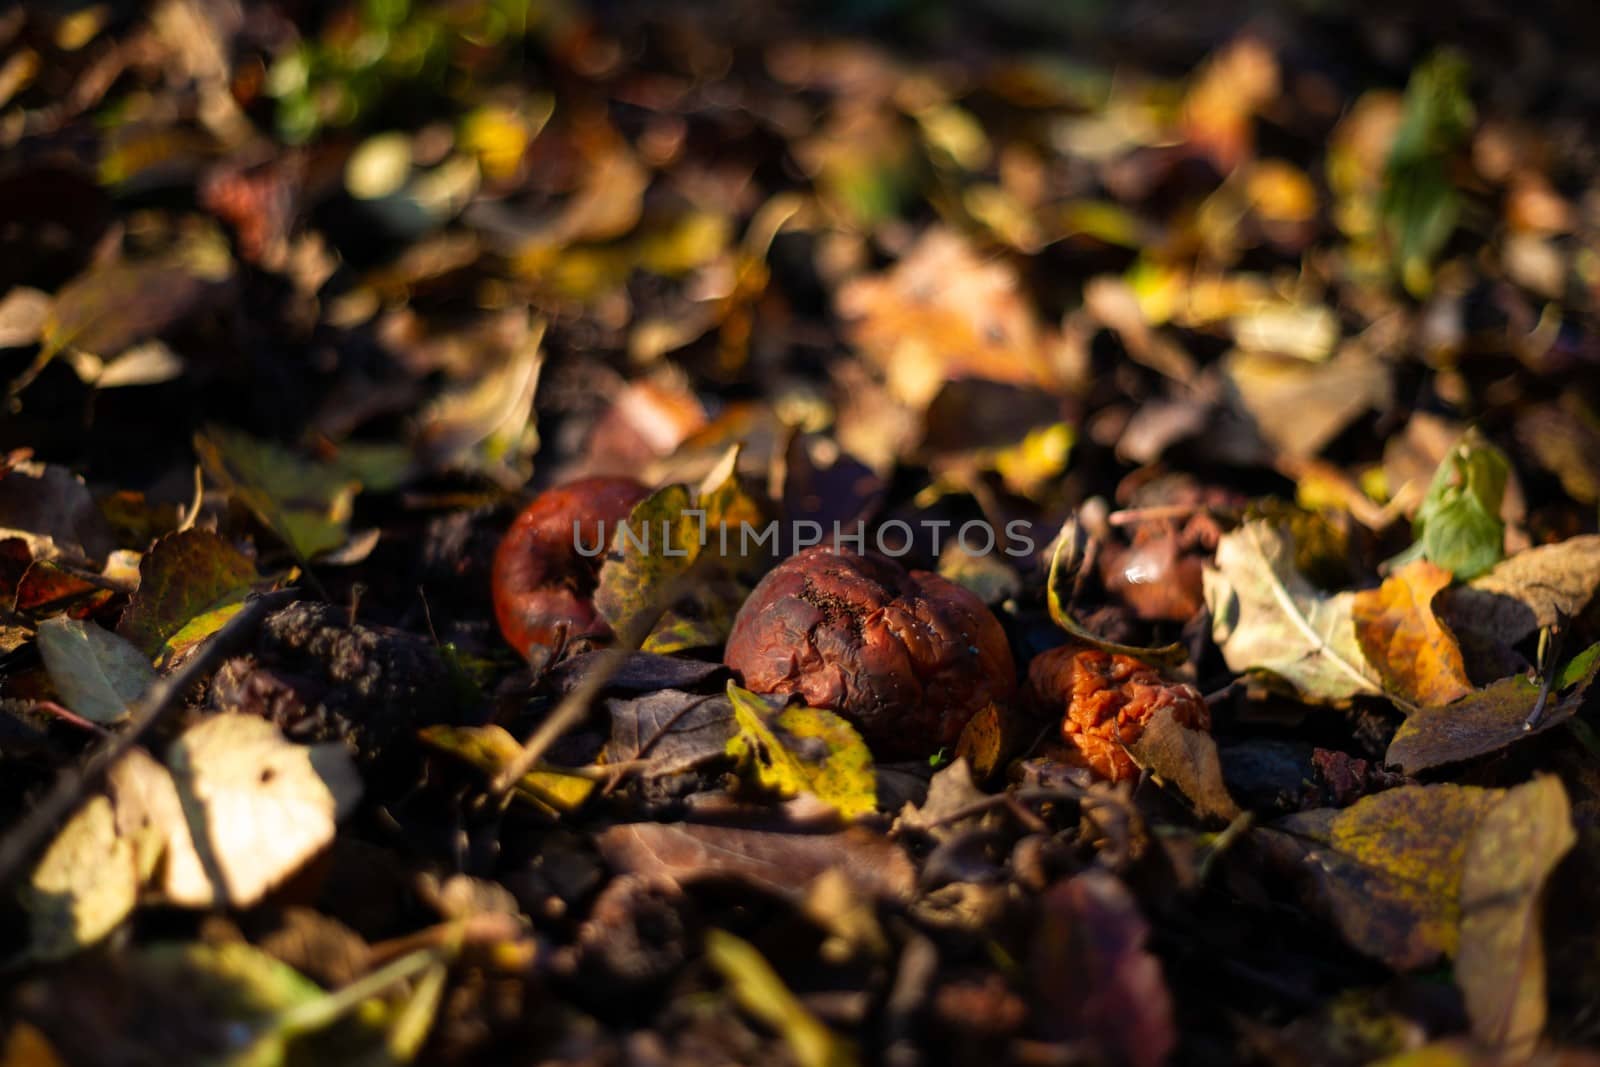 Rotten frozen apples on dark ground with orange leaves in apple garden. October frost and blurred background.